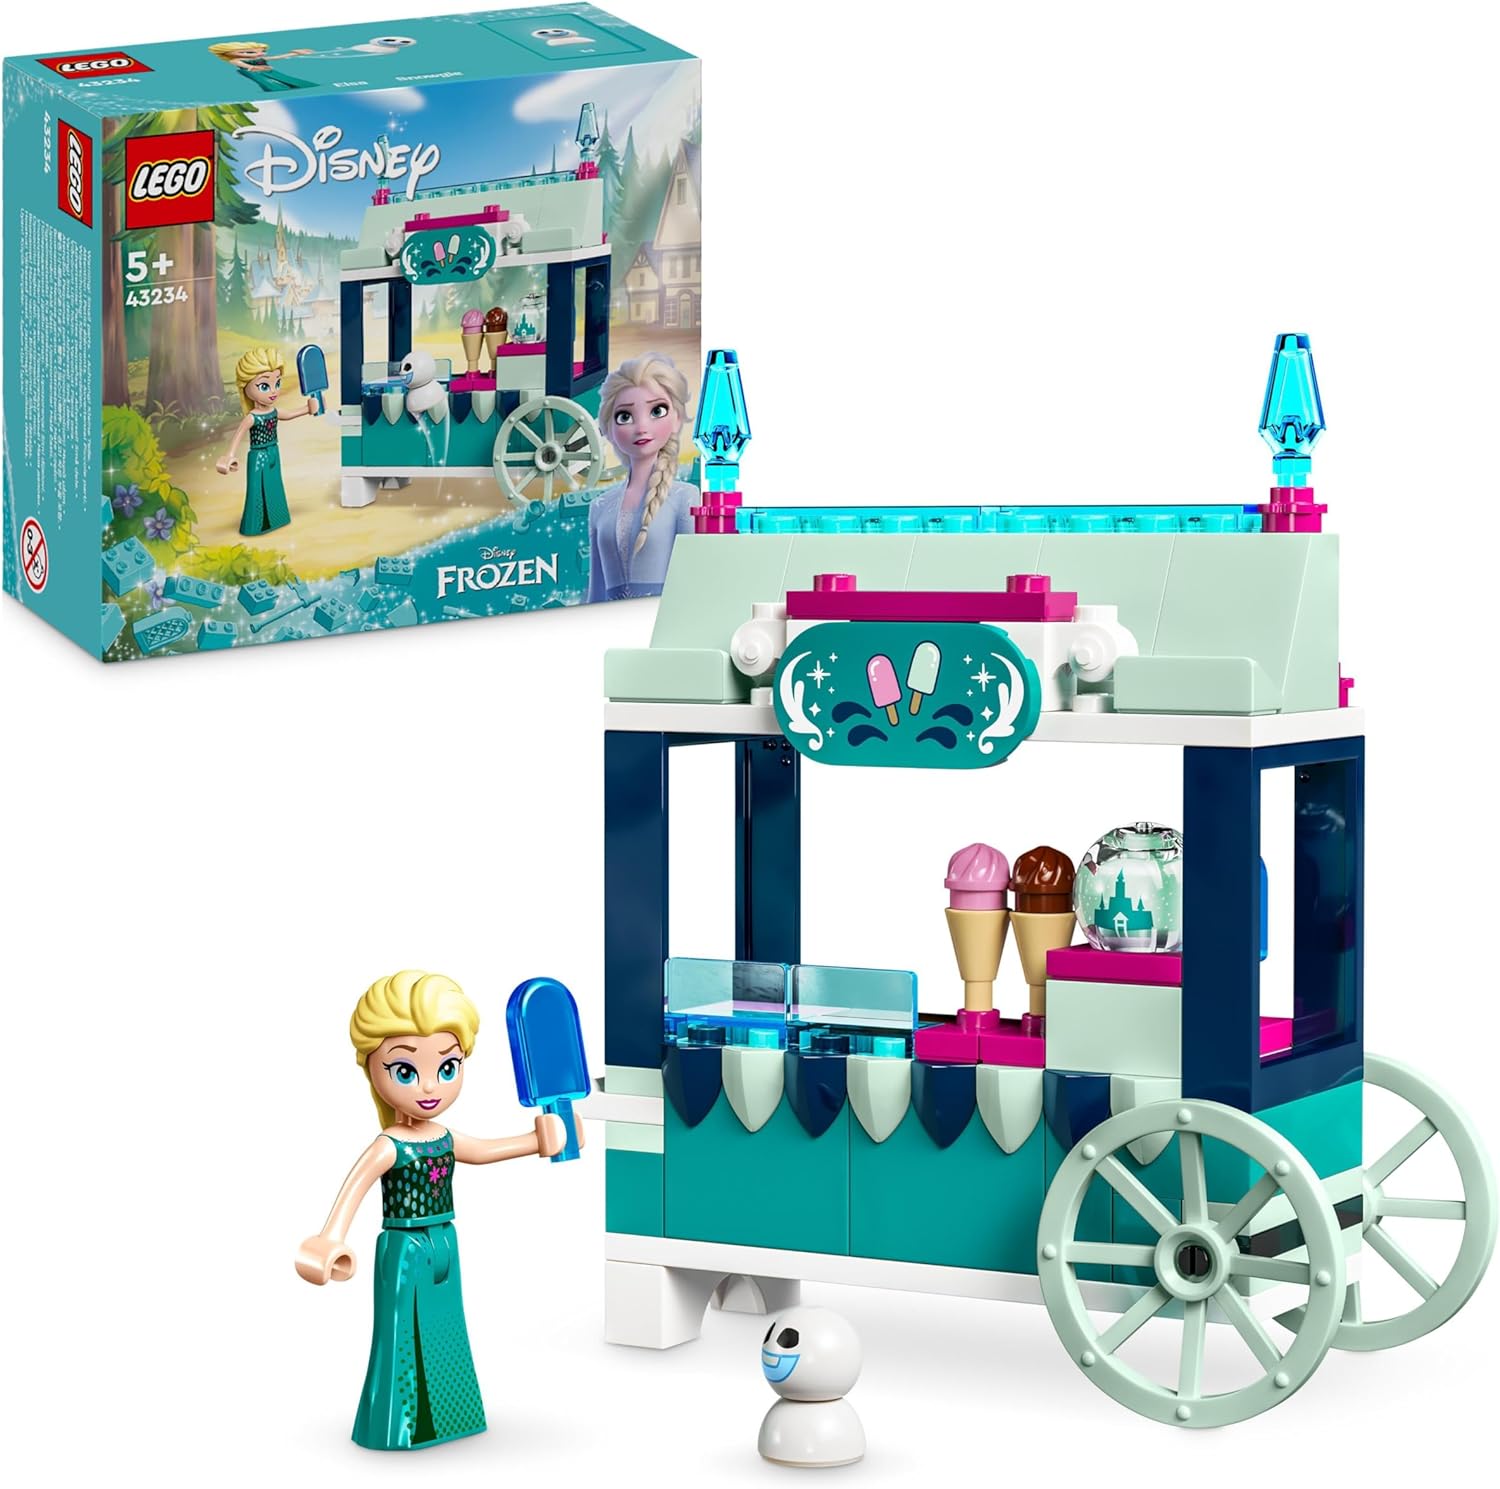 LEGO Disney Frozen Elsa\'s Ice Cream Stand, Ice Cream Toy for Children with Princess Elsa Doll and Mini Snowman, Set for the Film Frozen, Spontaneous Gift for Girls and Boys from 5 Years 43234